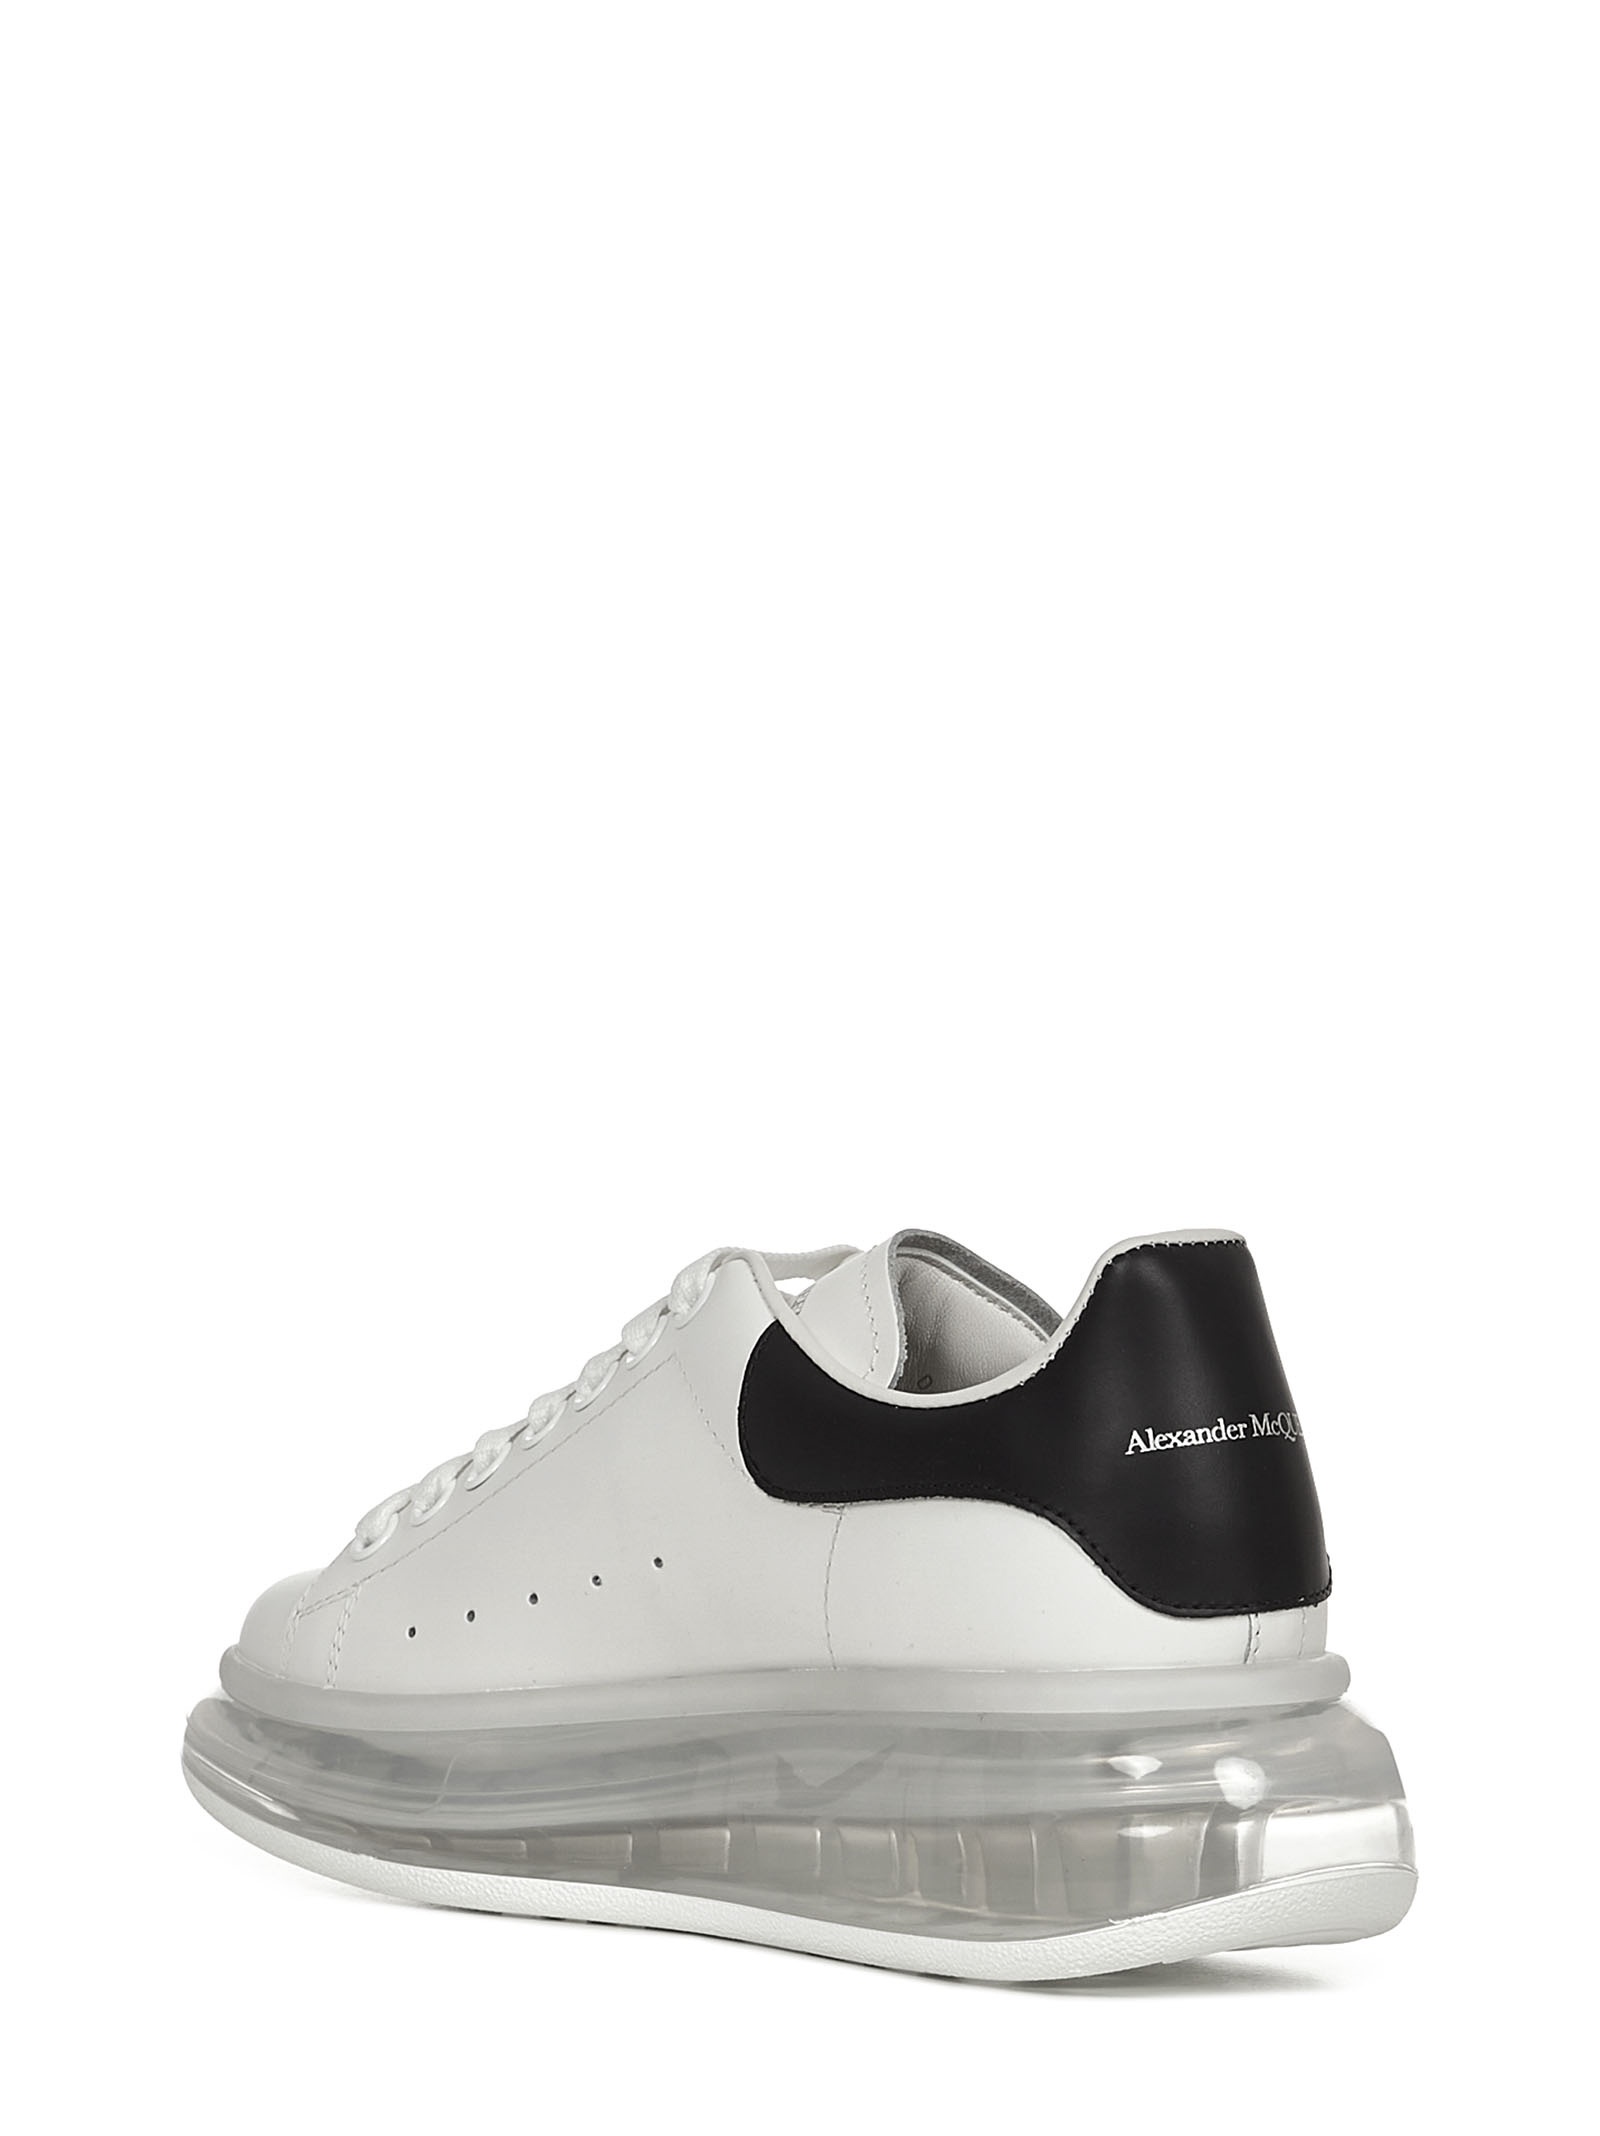 Larry sneakers in white calfskin with black leather insert on the heel and transparent oversized sol - 3